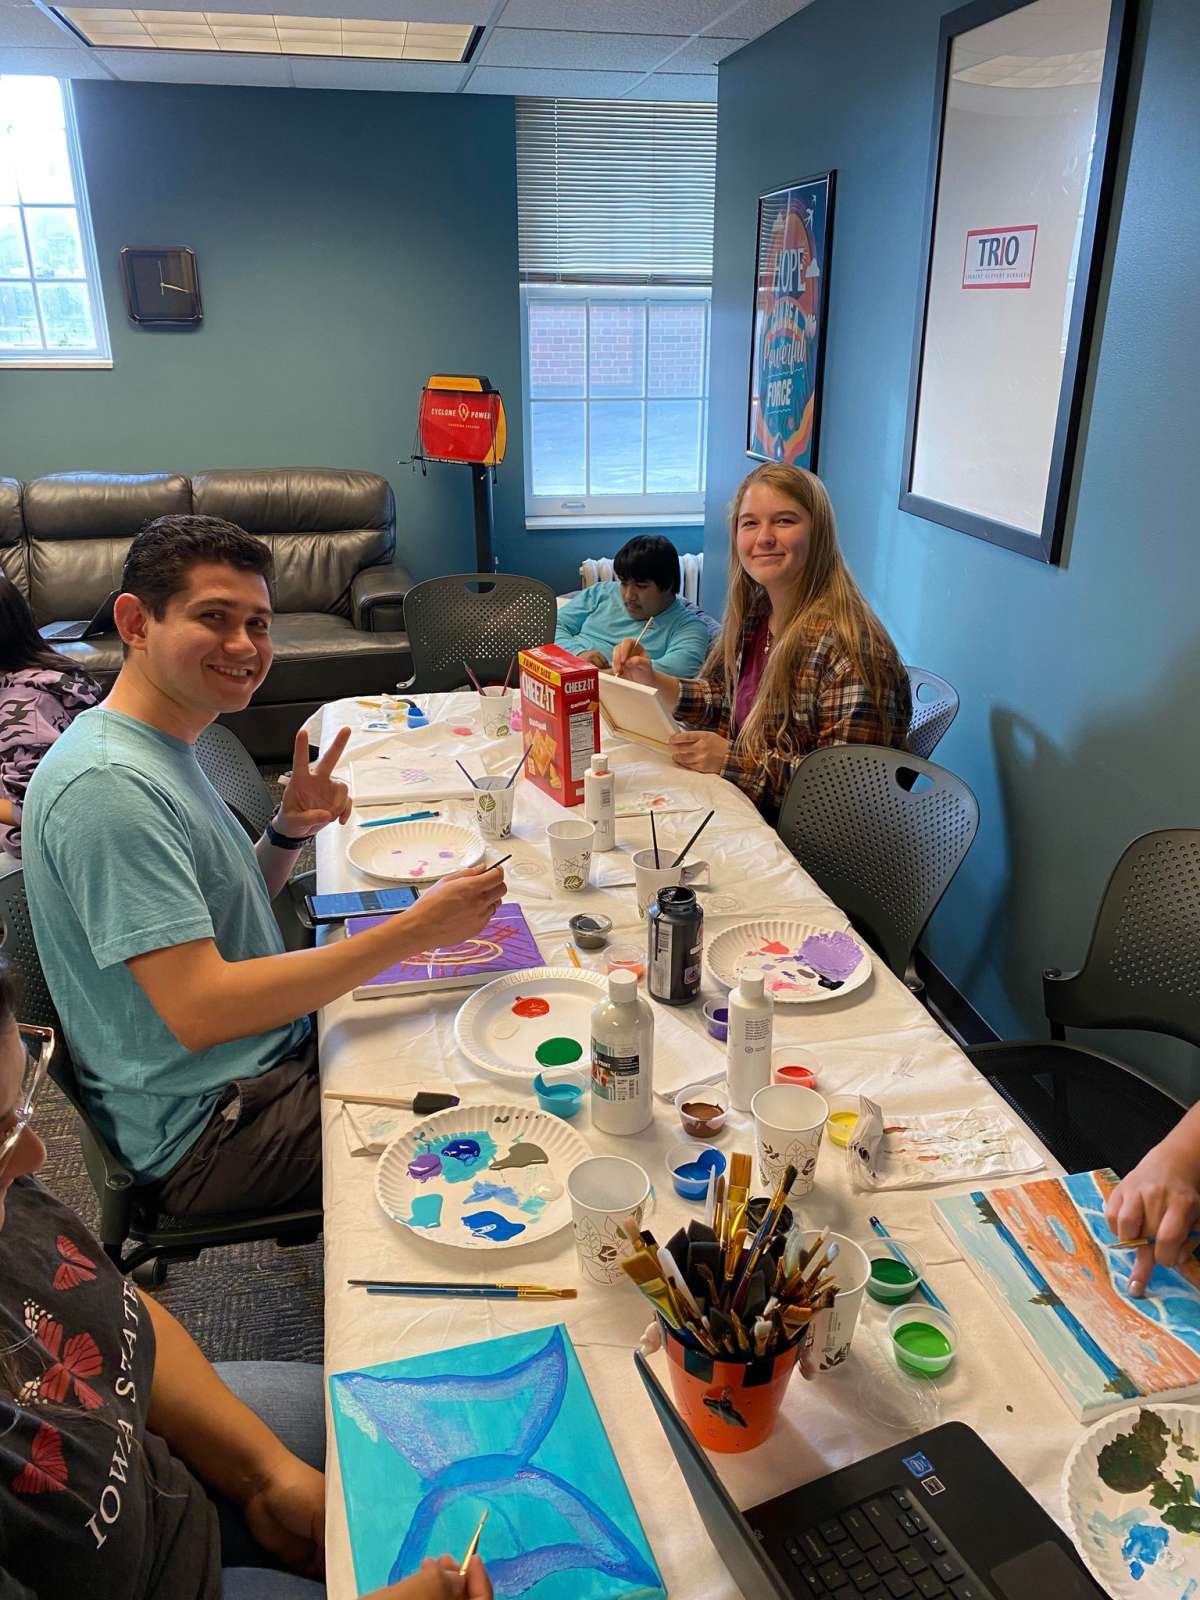 A group of students painting at a Trio event